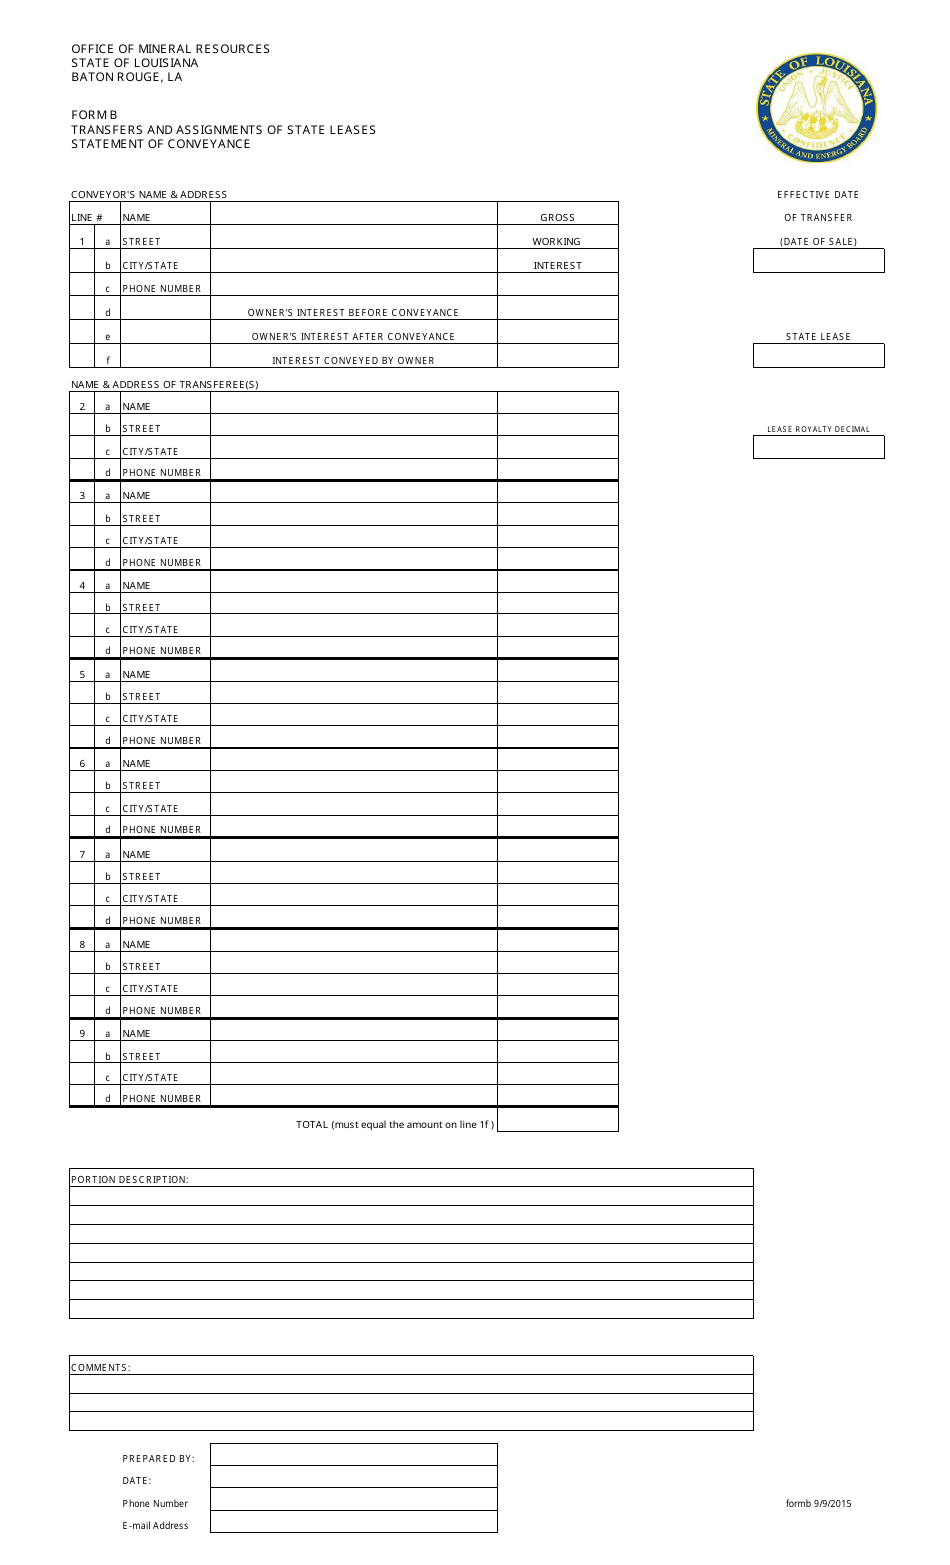 Form B Transfers and Assignments of State Leases Statement of Conveyance - Louisiana, Page 1